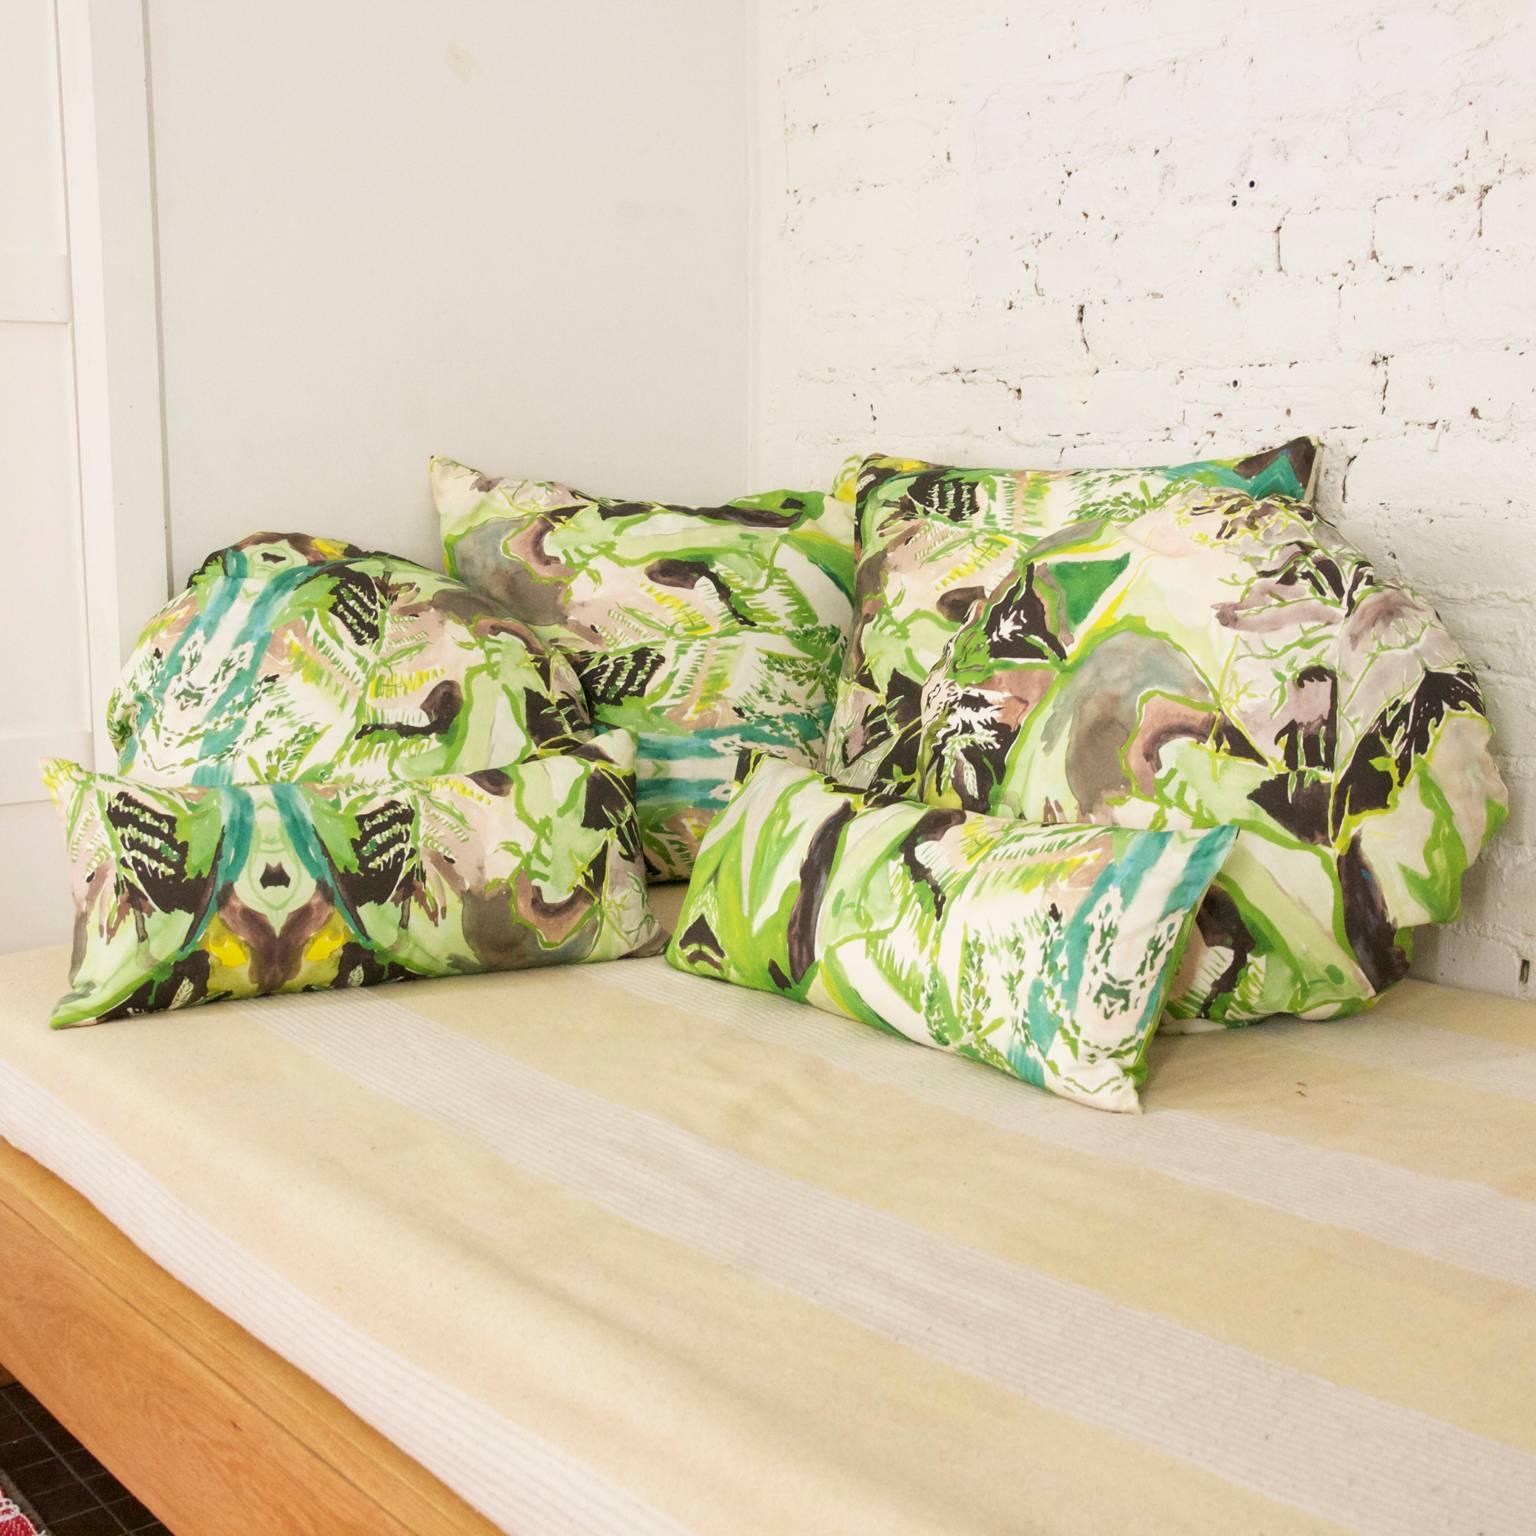 Contemporary Square Fern Pillow For Sale